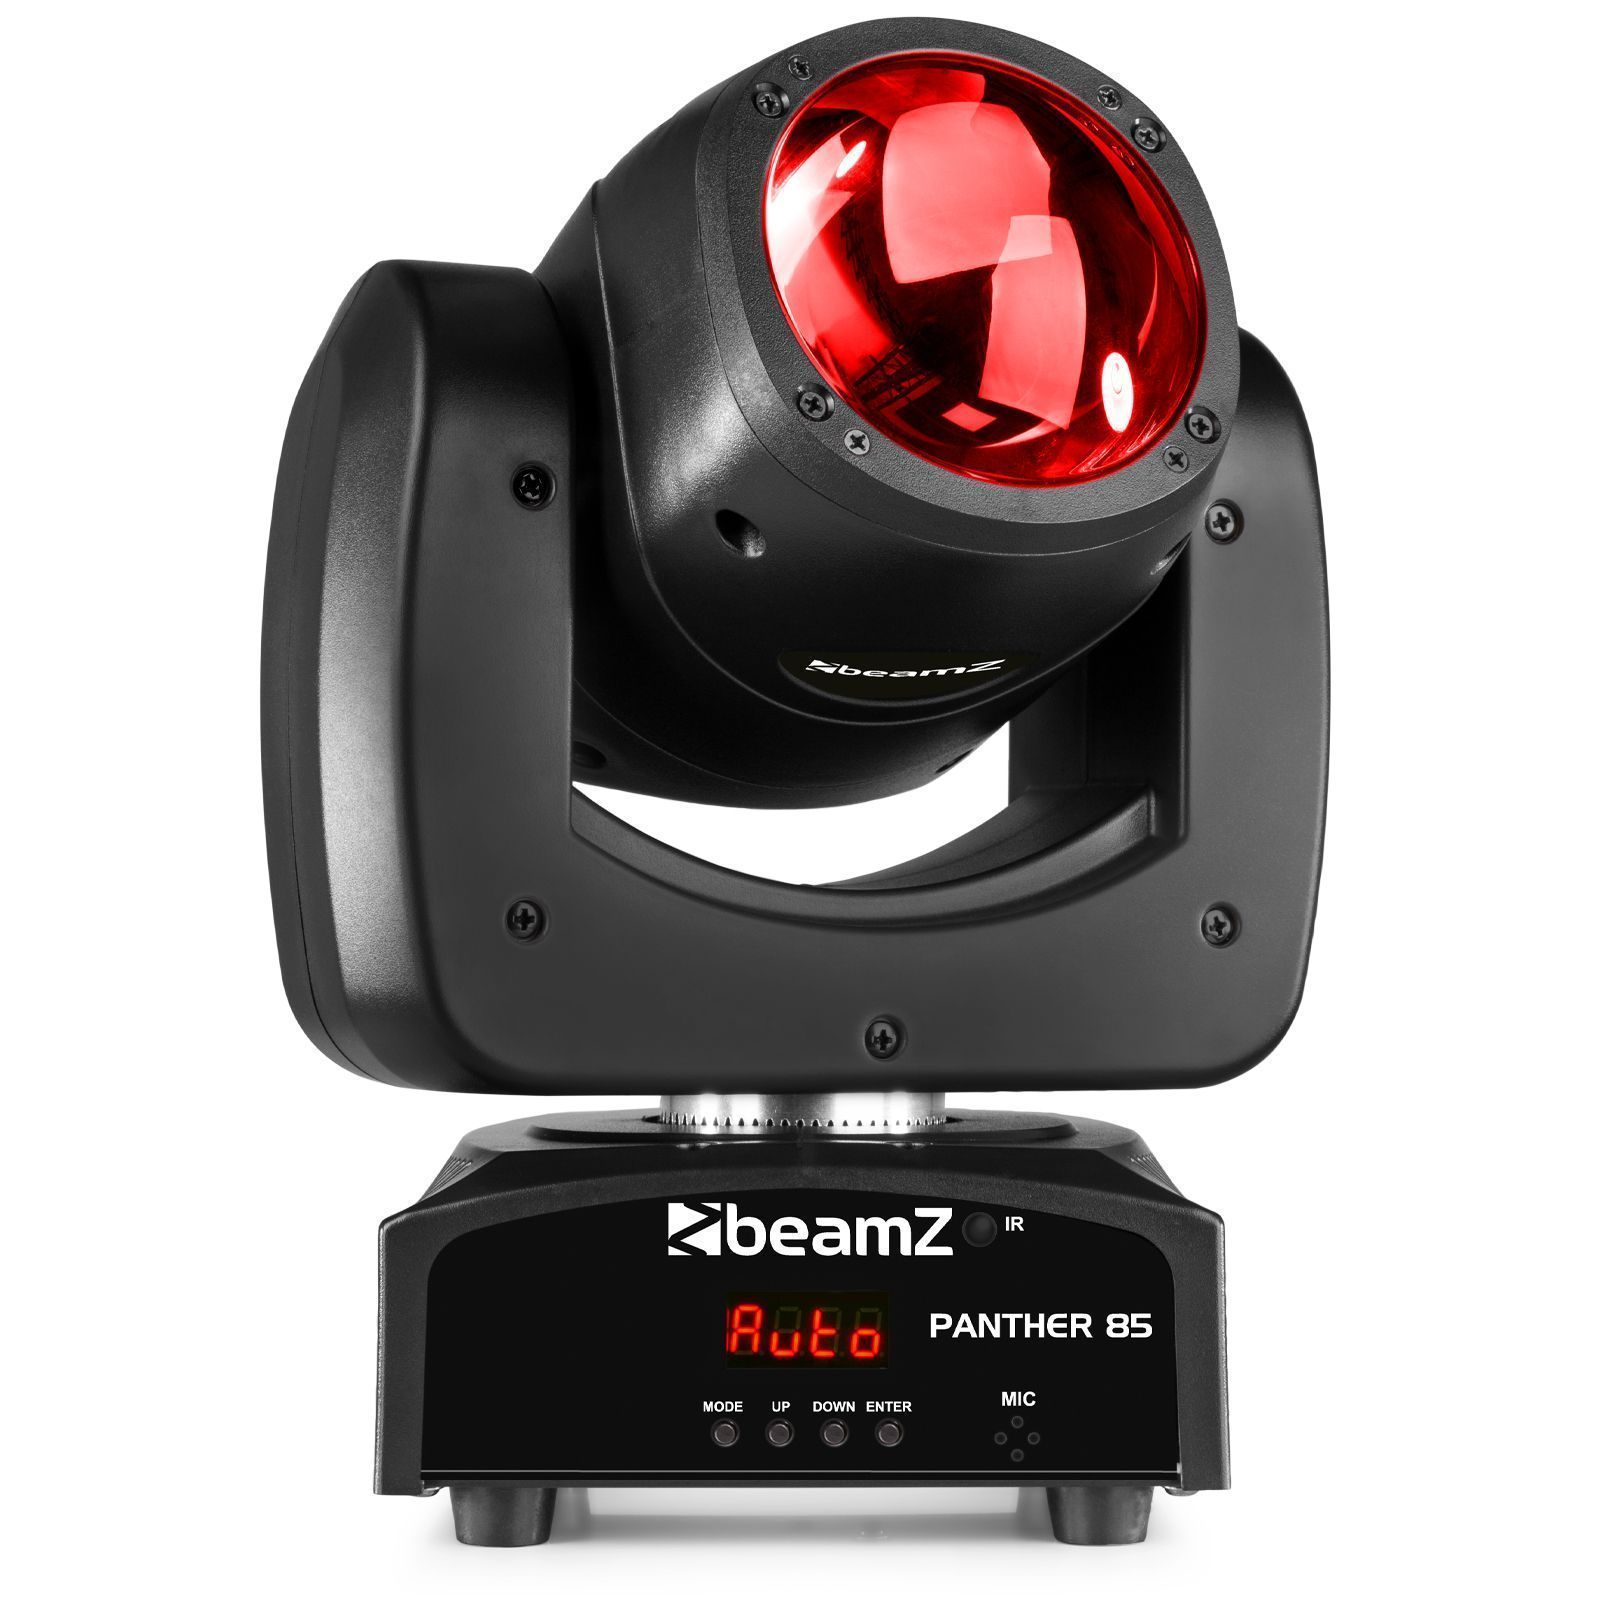 Retourdeal - BeamZ Panther 85 RGBW LED Beam moving head - 80W